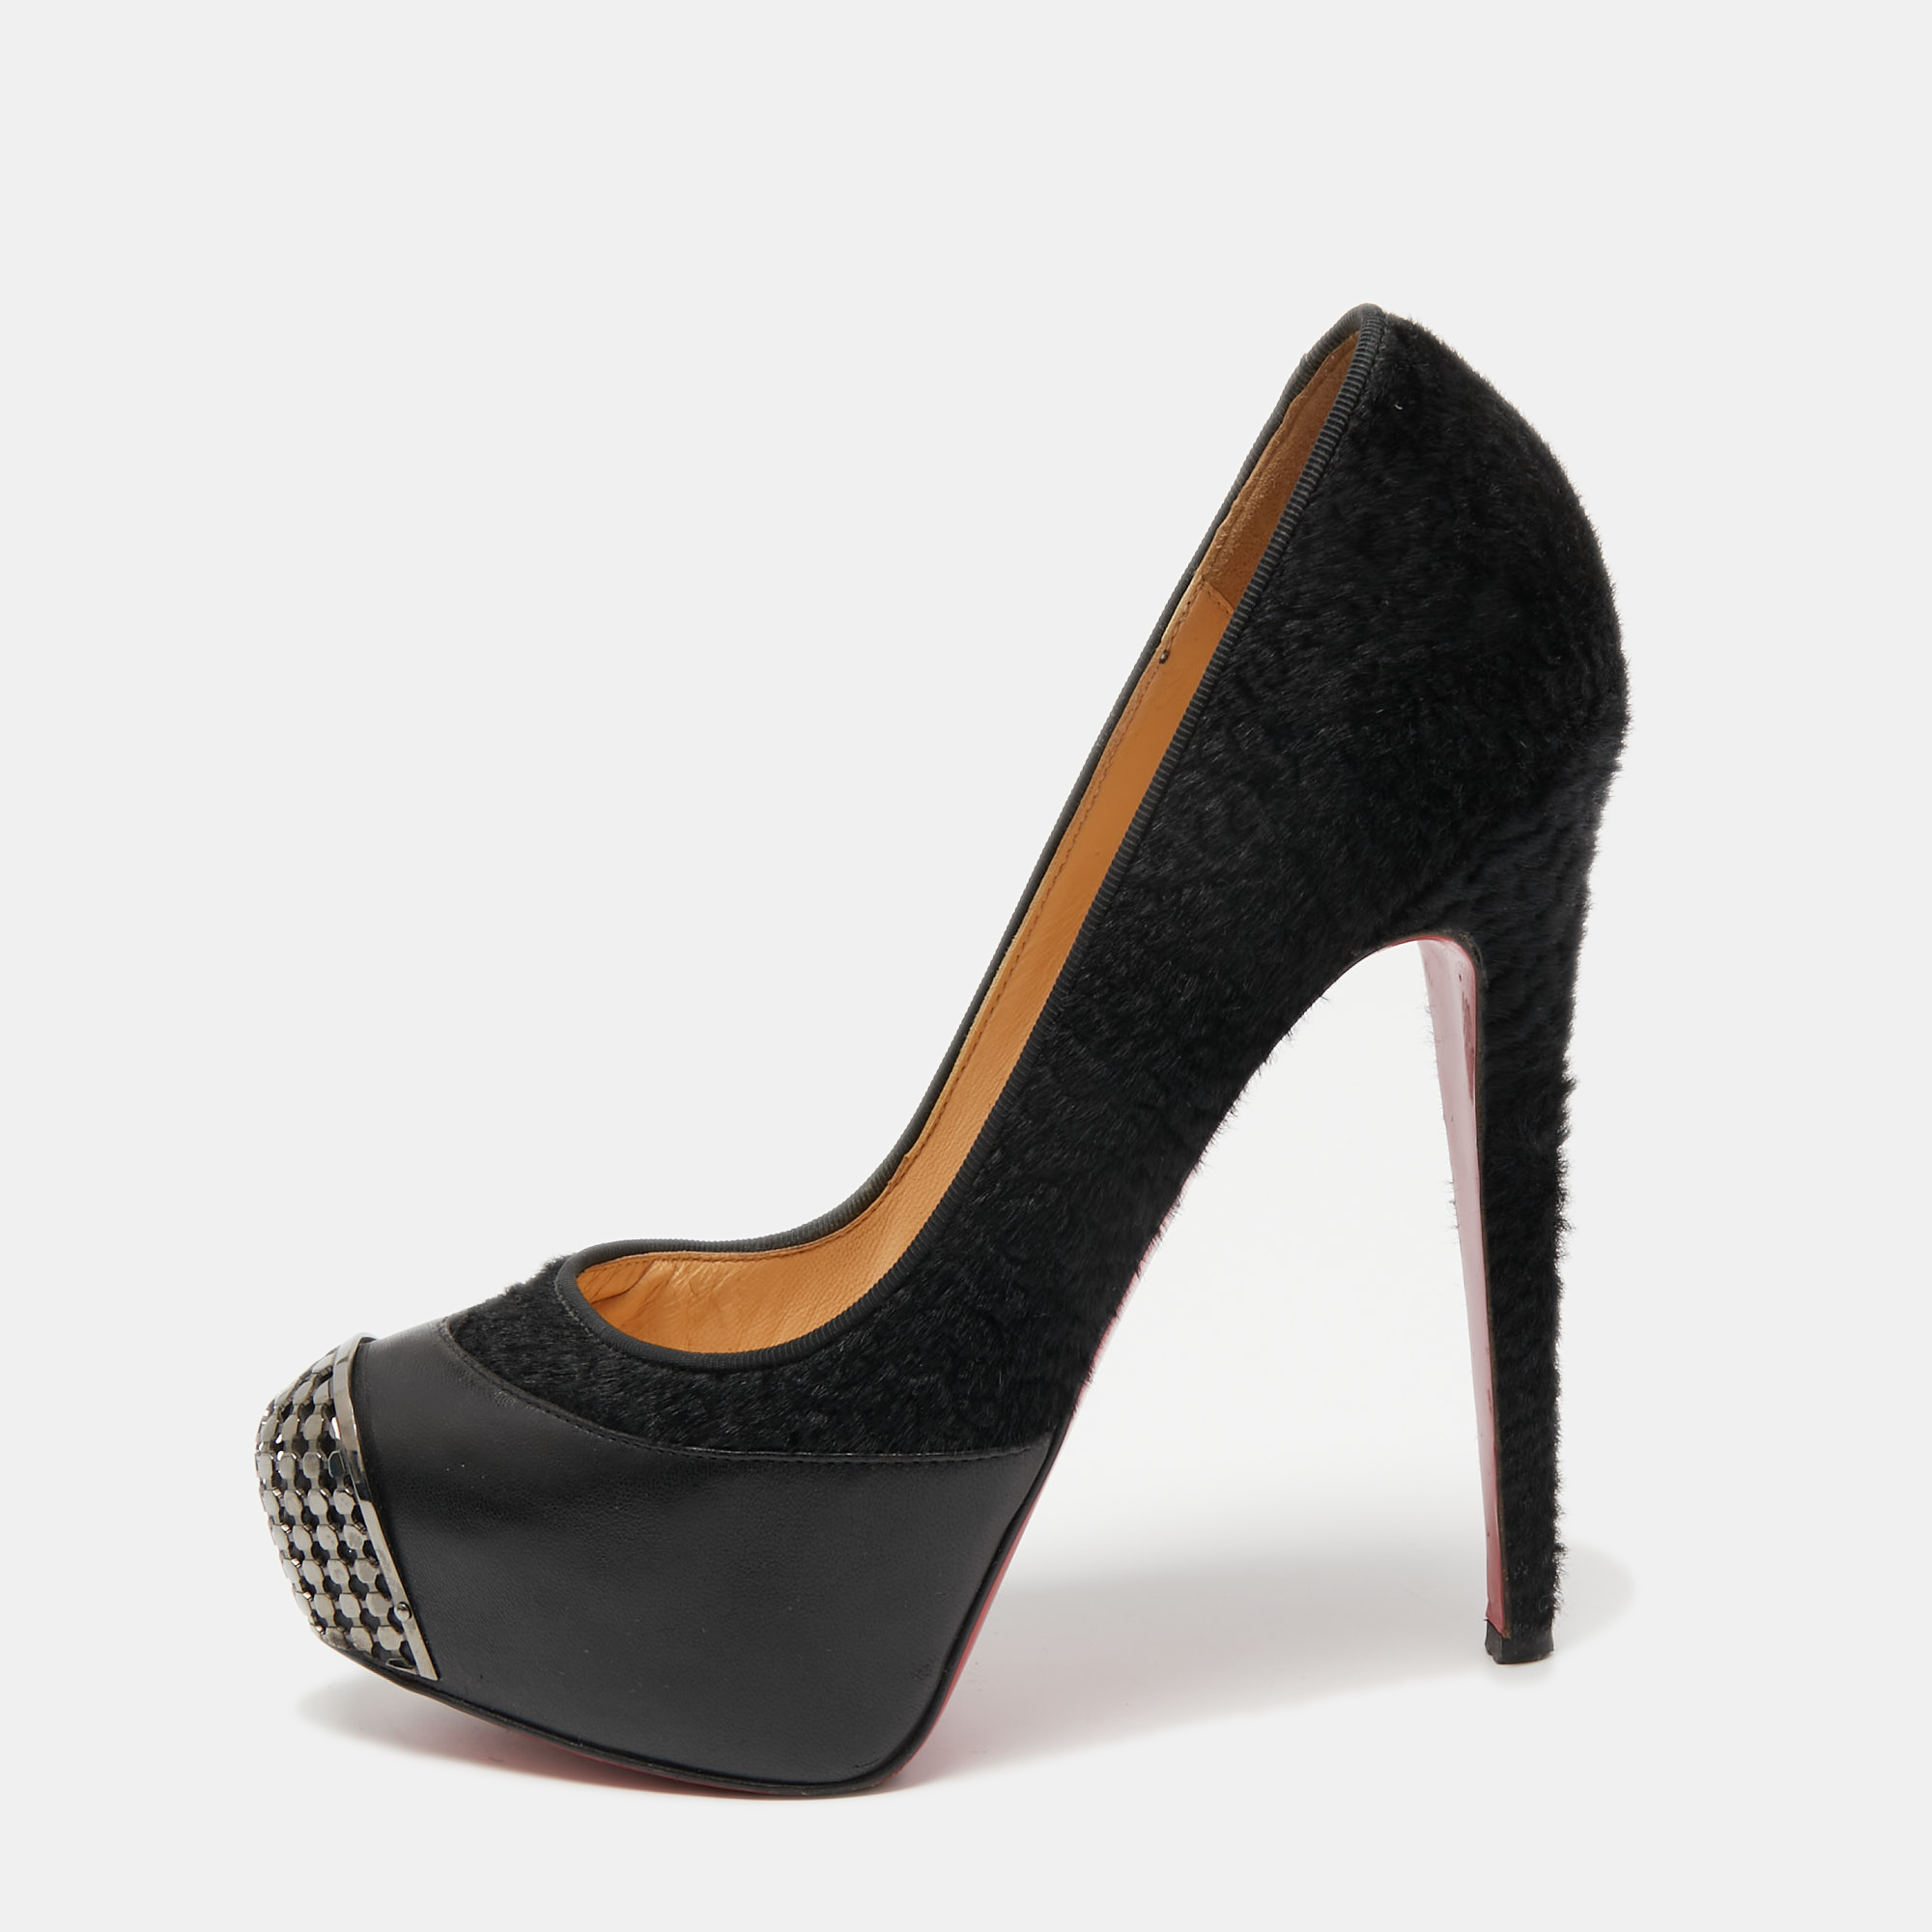 Crafted using leather and calf hair these Christian Louboutin pumps are meant to add a sophisticated finish to your look of the day. The designer pumps feature metal detailed toes platforms and 14.5 cm heels.